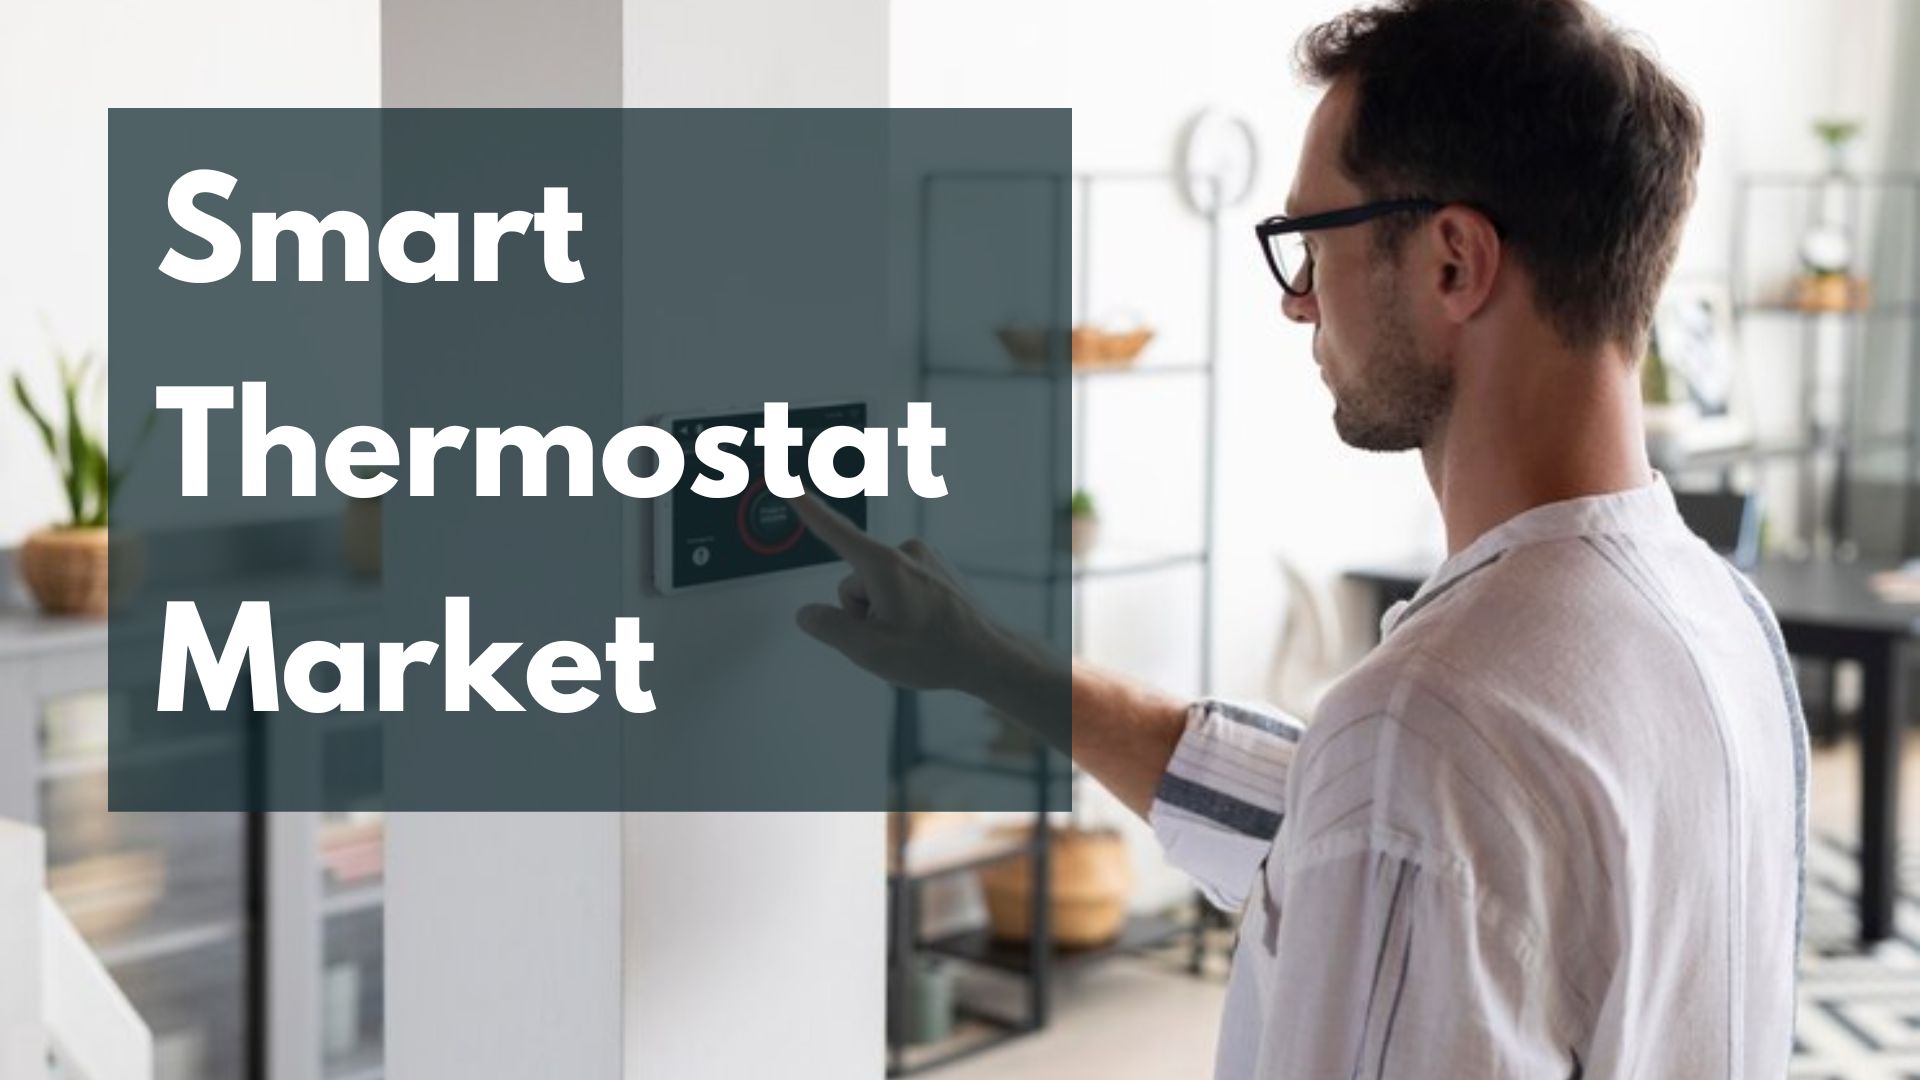 Smart Thermostat Market Products: Connected, Standalone, and Learning Innovations